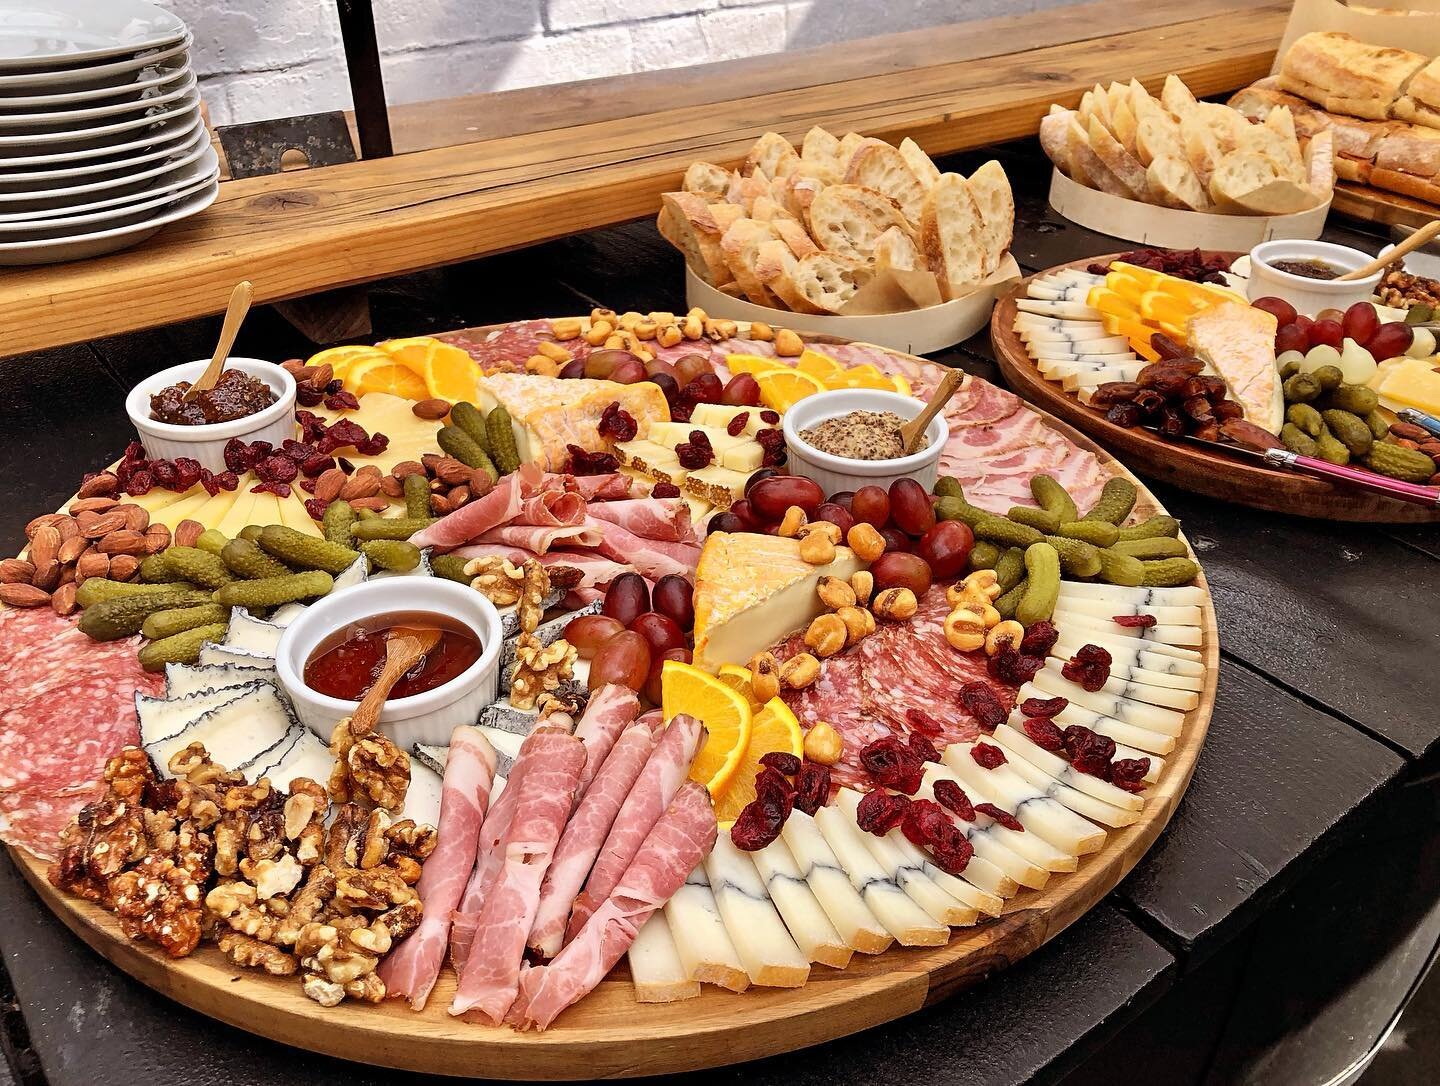 Large, medium, or small, for here or to go, if you need a cheese and charcuterie platter for the holidays, this is a great time to get an order in! 
Just give us a call or stop by and we&rsquo;ll be happy to help.